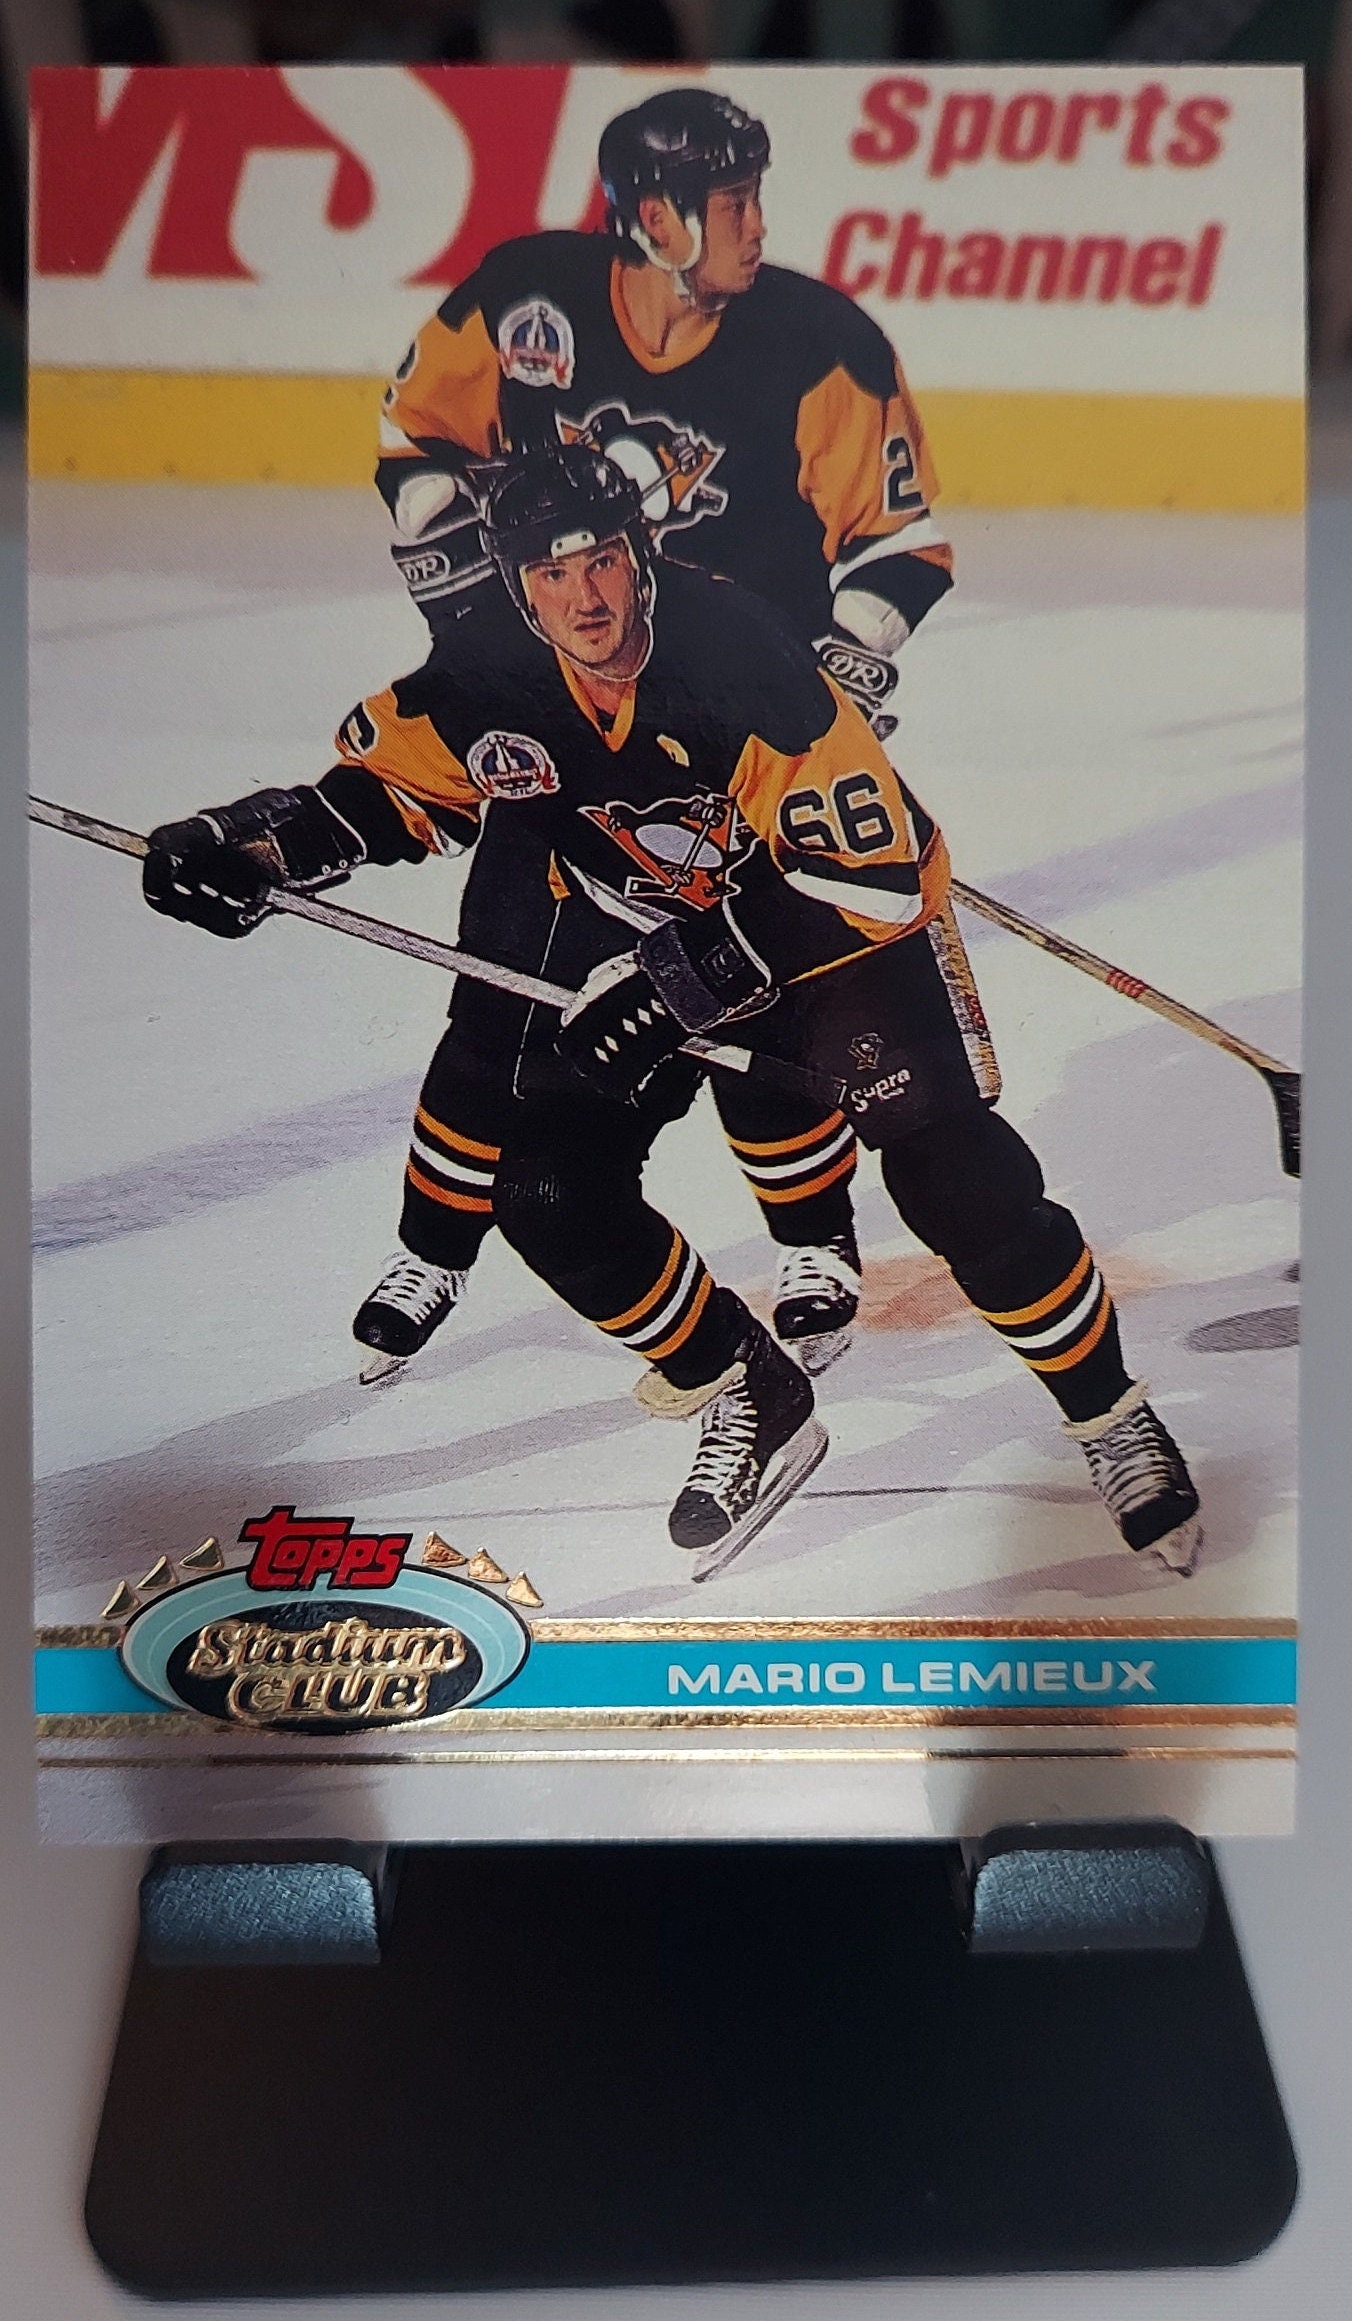 1991: Mario Lemieux leads Pittsburgh Penguins to first Stanley Cup title